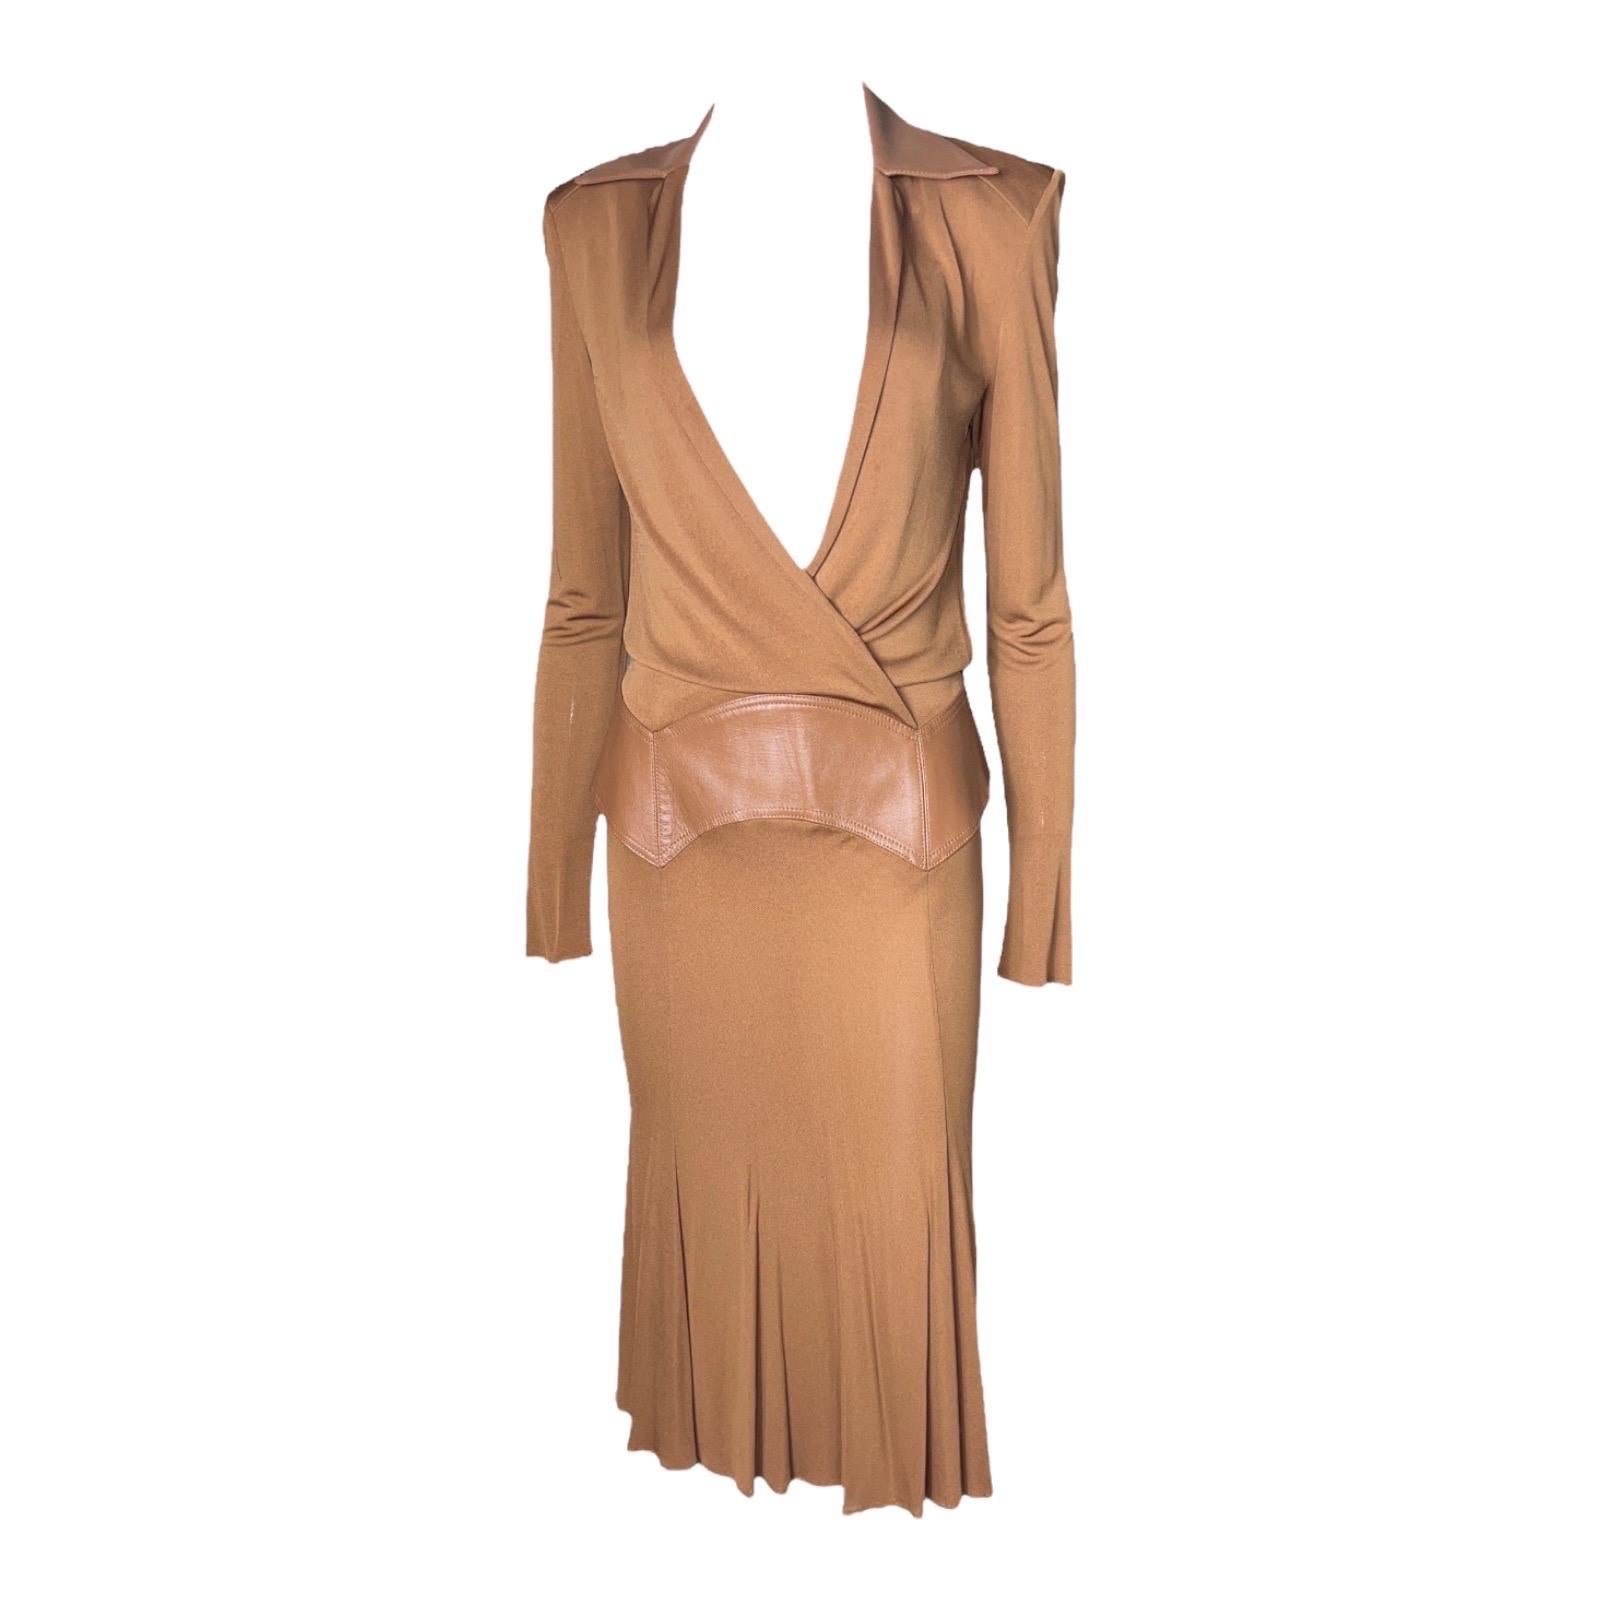 UNWORN Gianni Versace Couture 2001 Rare Cognac Brown Leather Evening Dress 40 In Good Condition For Sale In Switzerland, CH